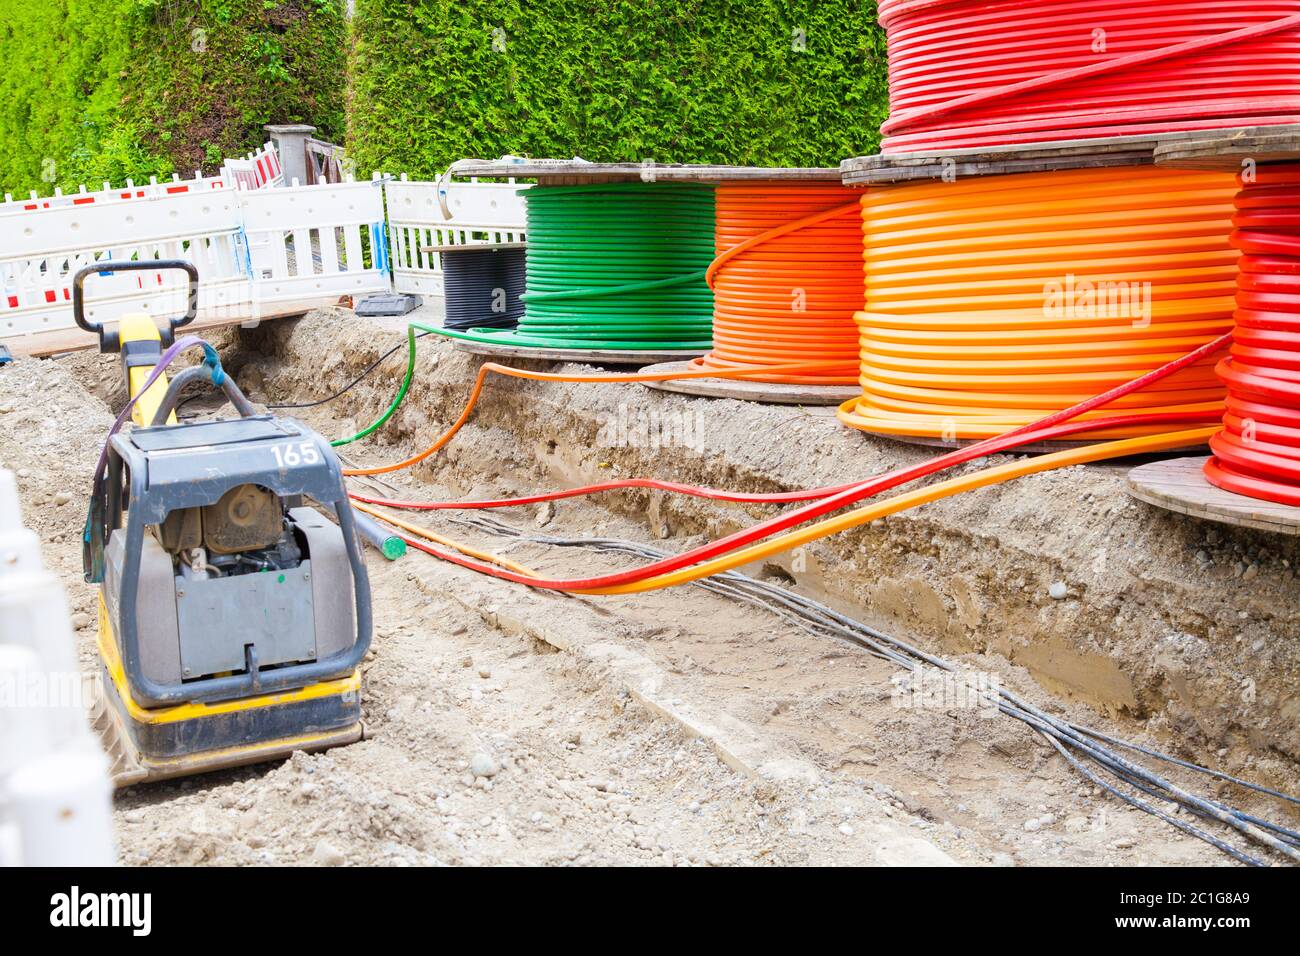 Construction site with glass fibre cables Stock Photo